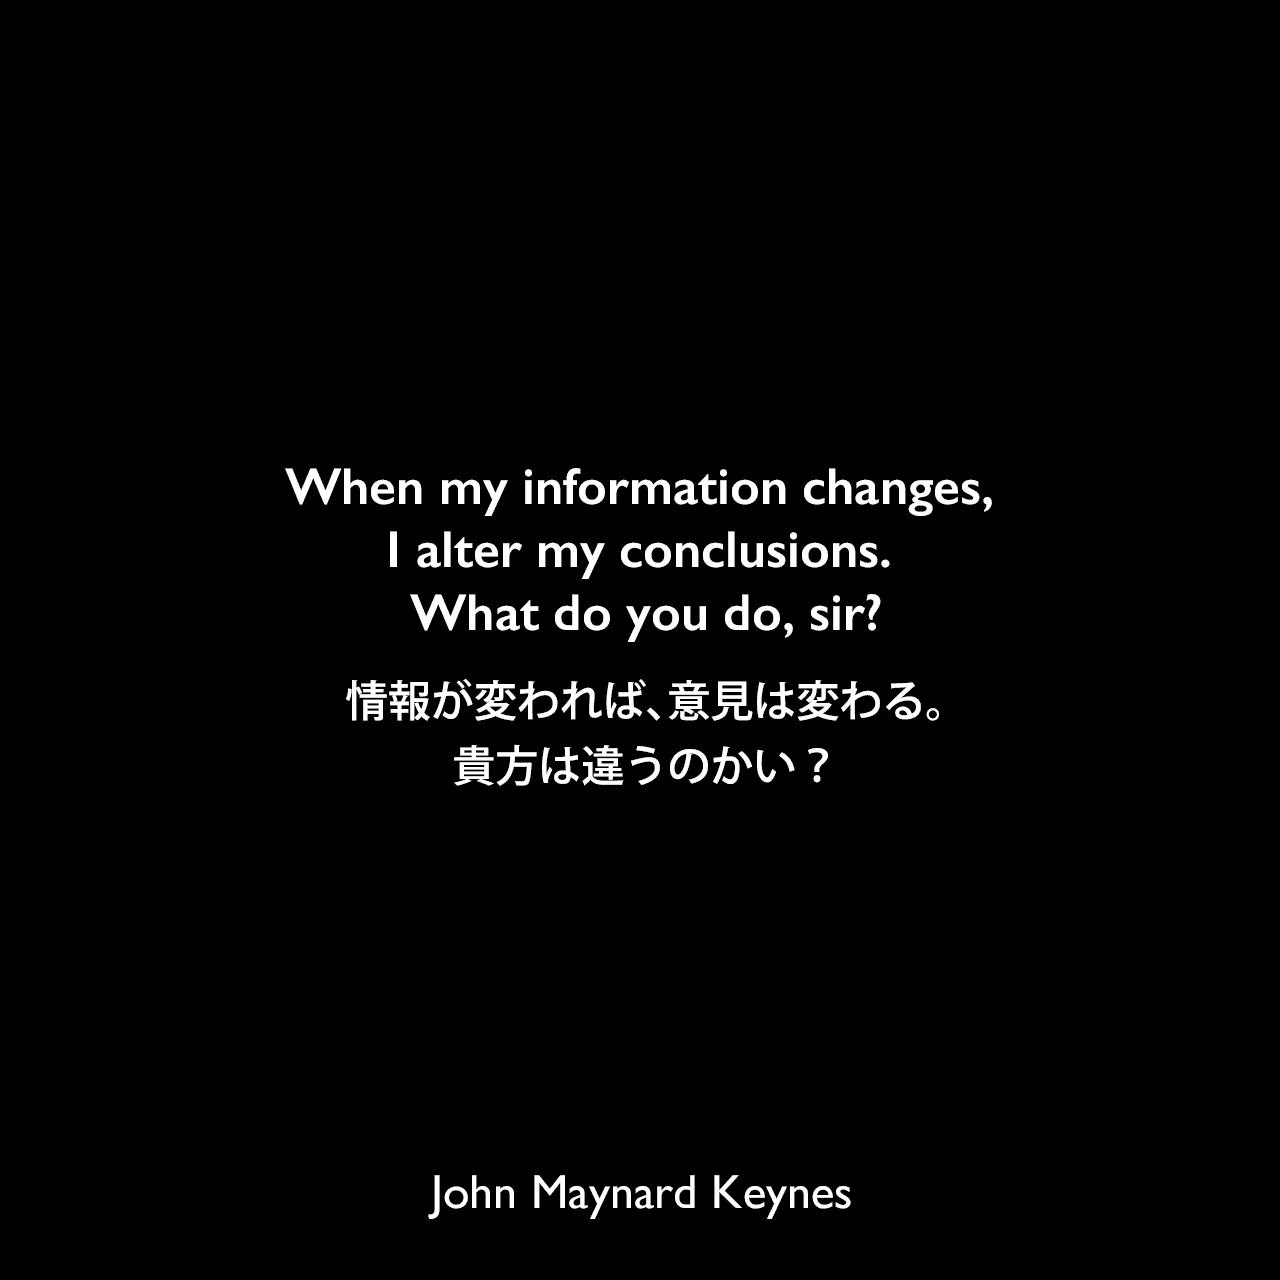 When my information changes, I alter my conclusions. What do you do, sir?情報が変われば、意見は変わる。貴方は違うのかい？John Maynard Keynes